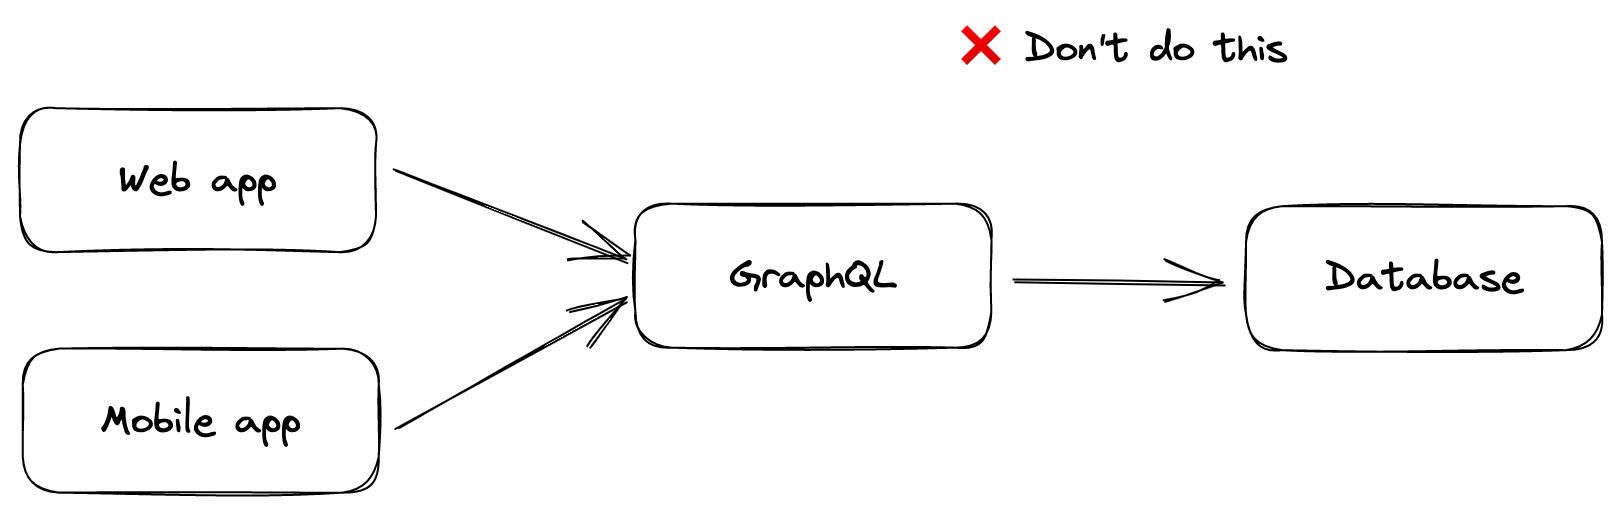 GraphQL connecting directly to DB